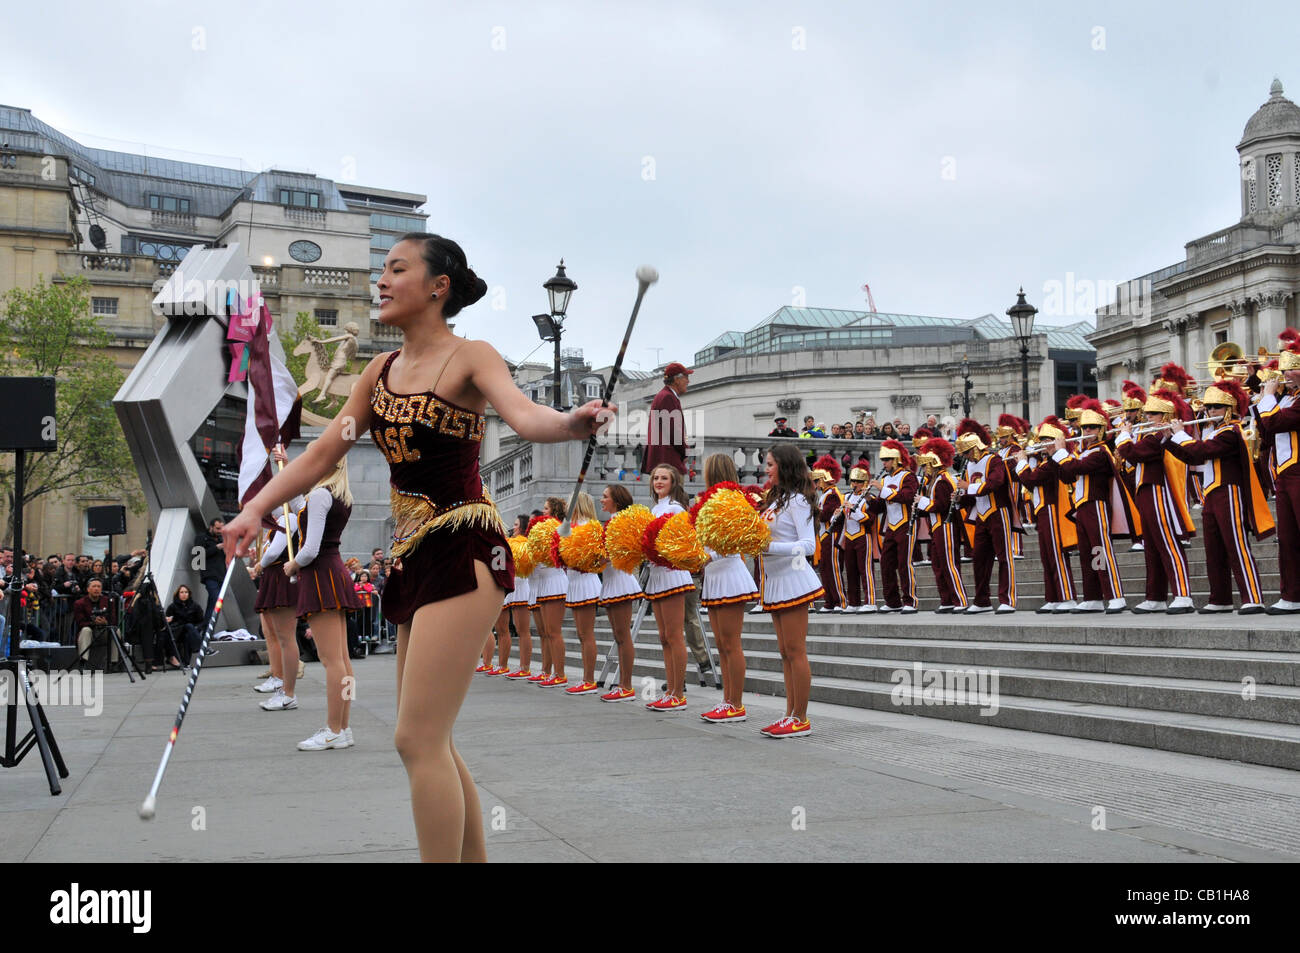 London, UK. 20/05/2012. A baton twirler and cheerleaders of the University of Southern California (USC), Trojans Football Team Marching Band perform in front of the Olympic Clock in Trafalgar Square, London, UK. Stock Photo